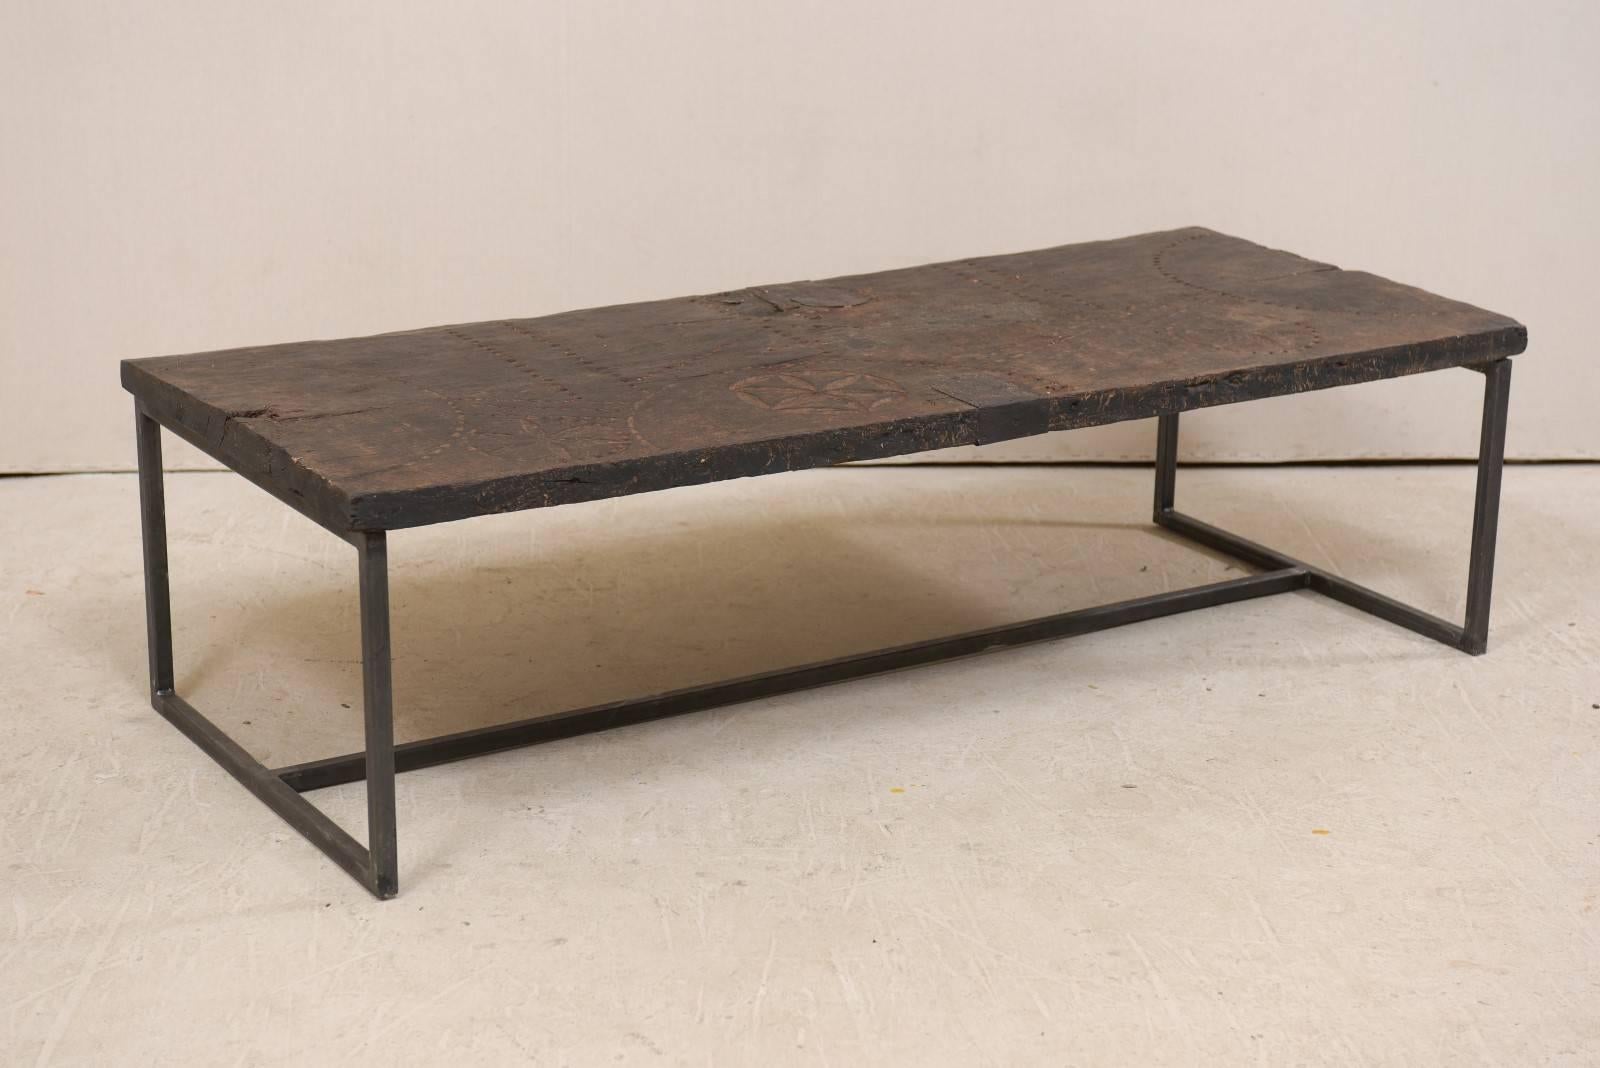 This is a custom coffee table made from an 18th century Spanish door. This unique coffee table has been fashioned from an 18th century Spanish door, with it's wonderful old patina and decorative top with floral accents and fluid lines which have